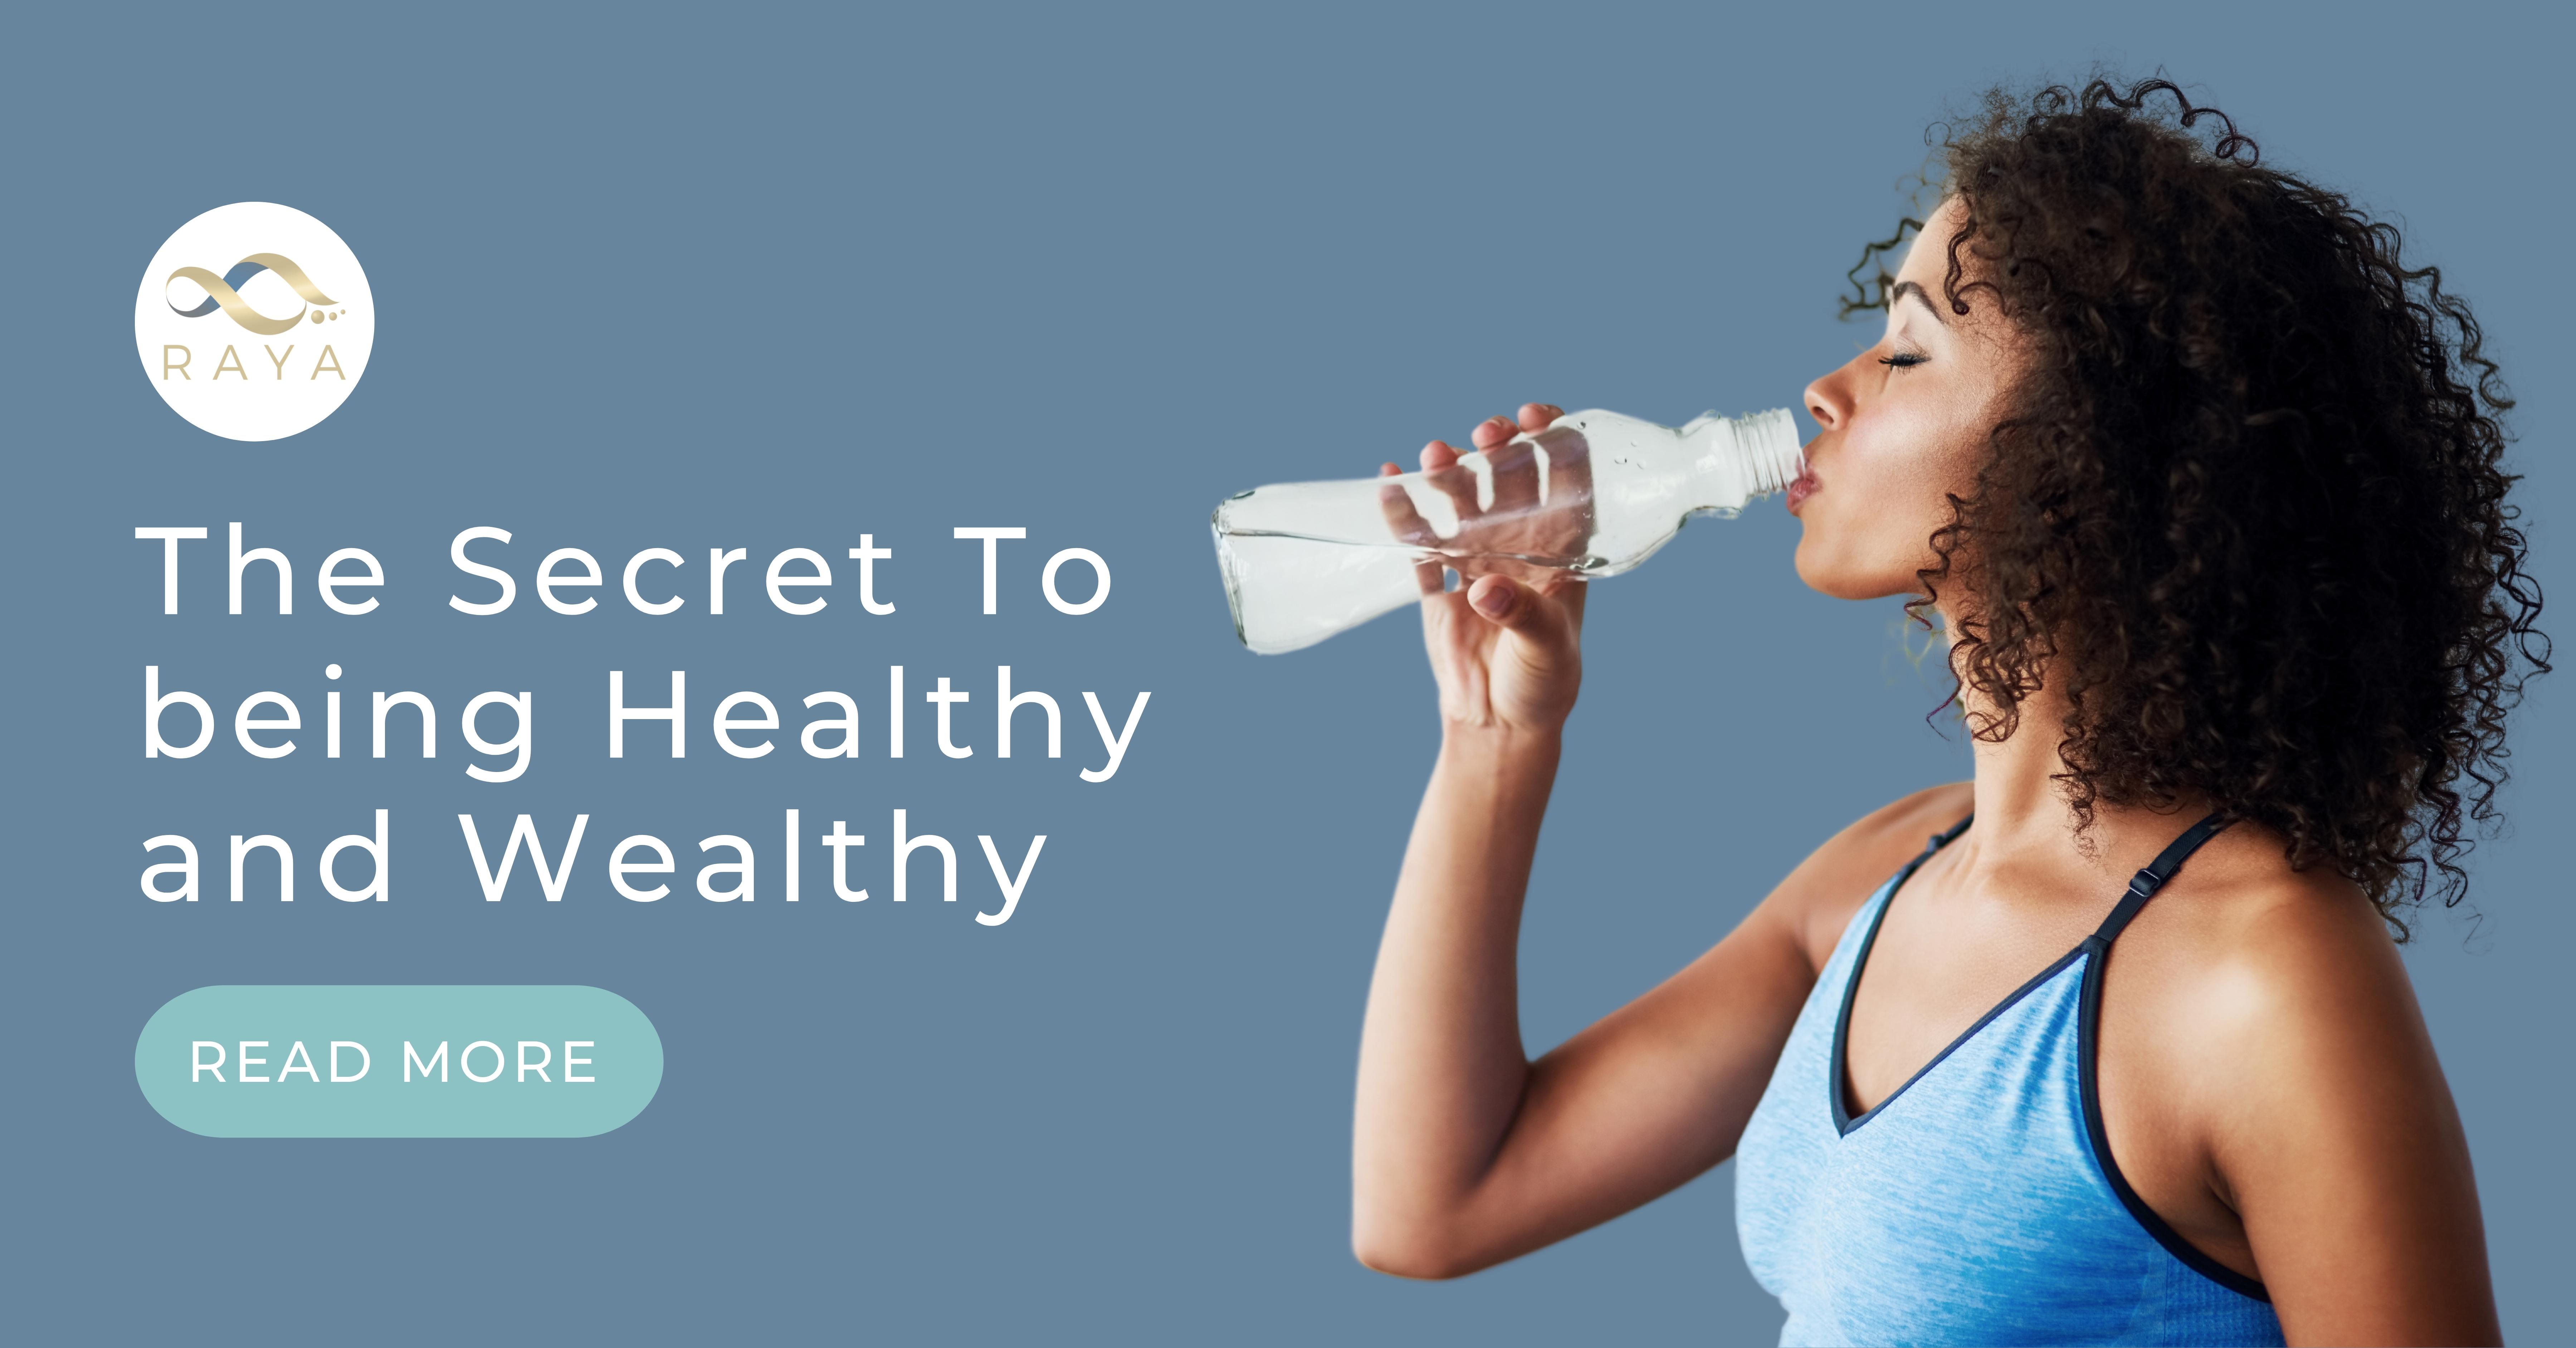 The Secret To being Healthy and Wealthy